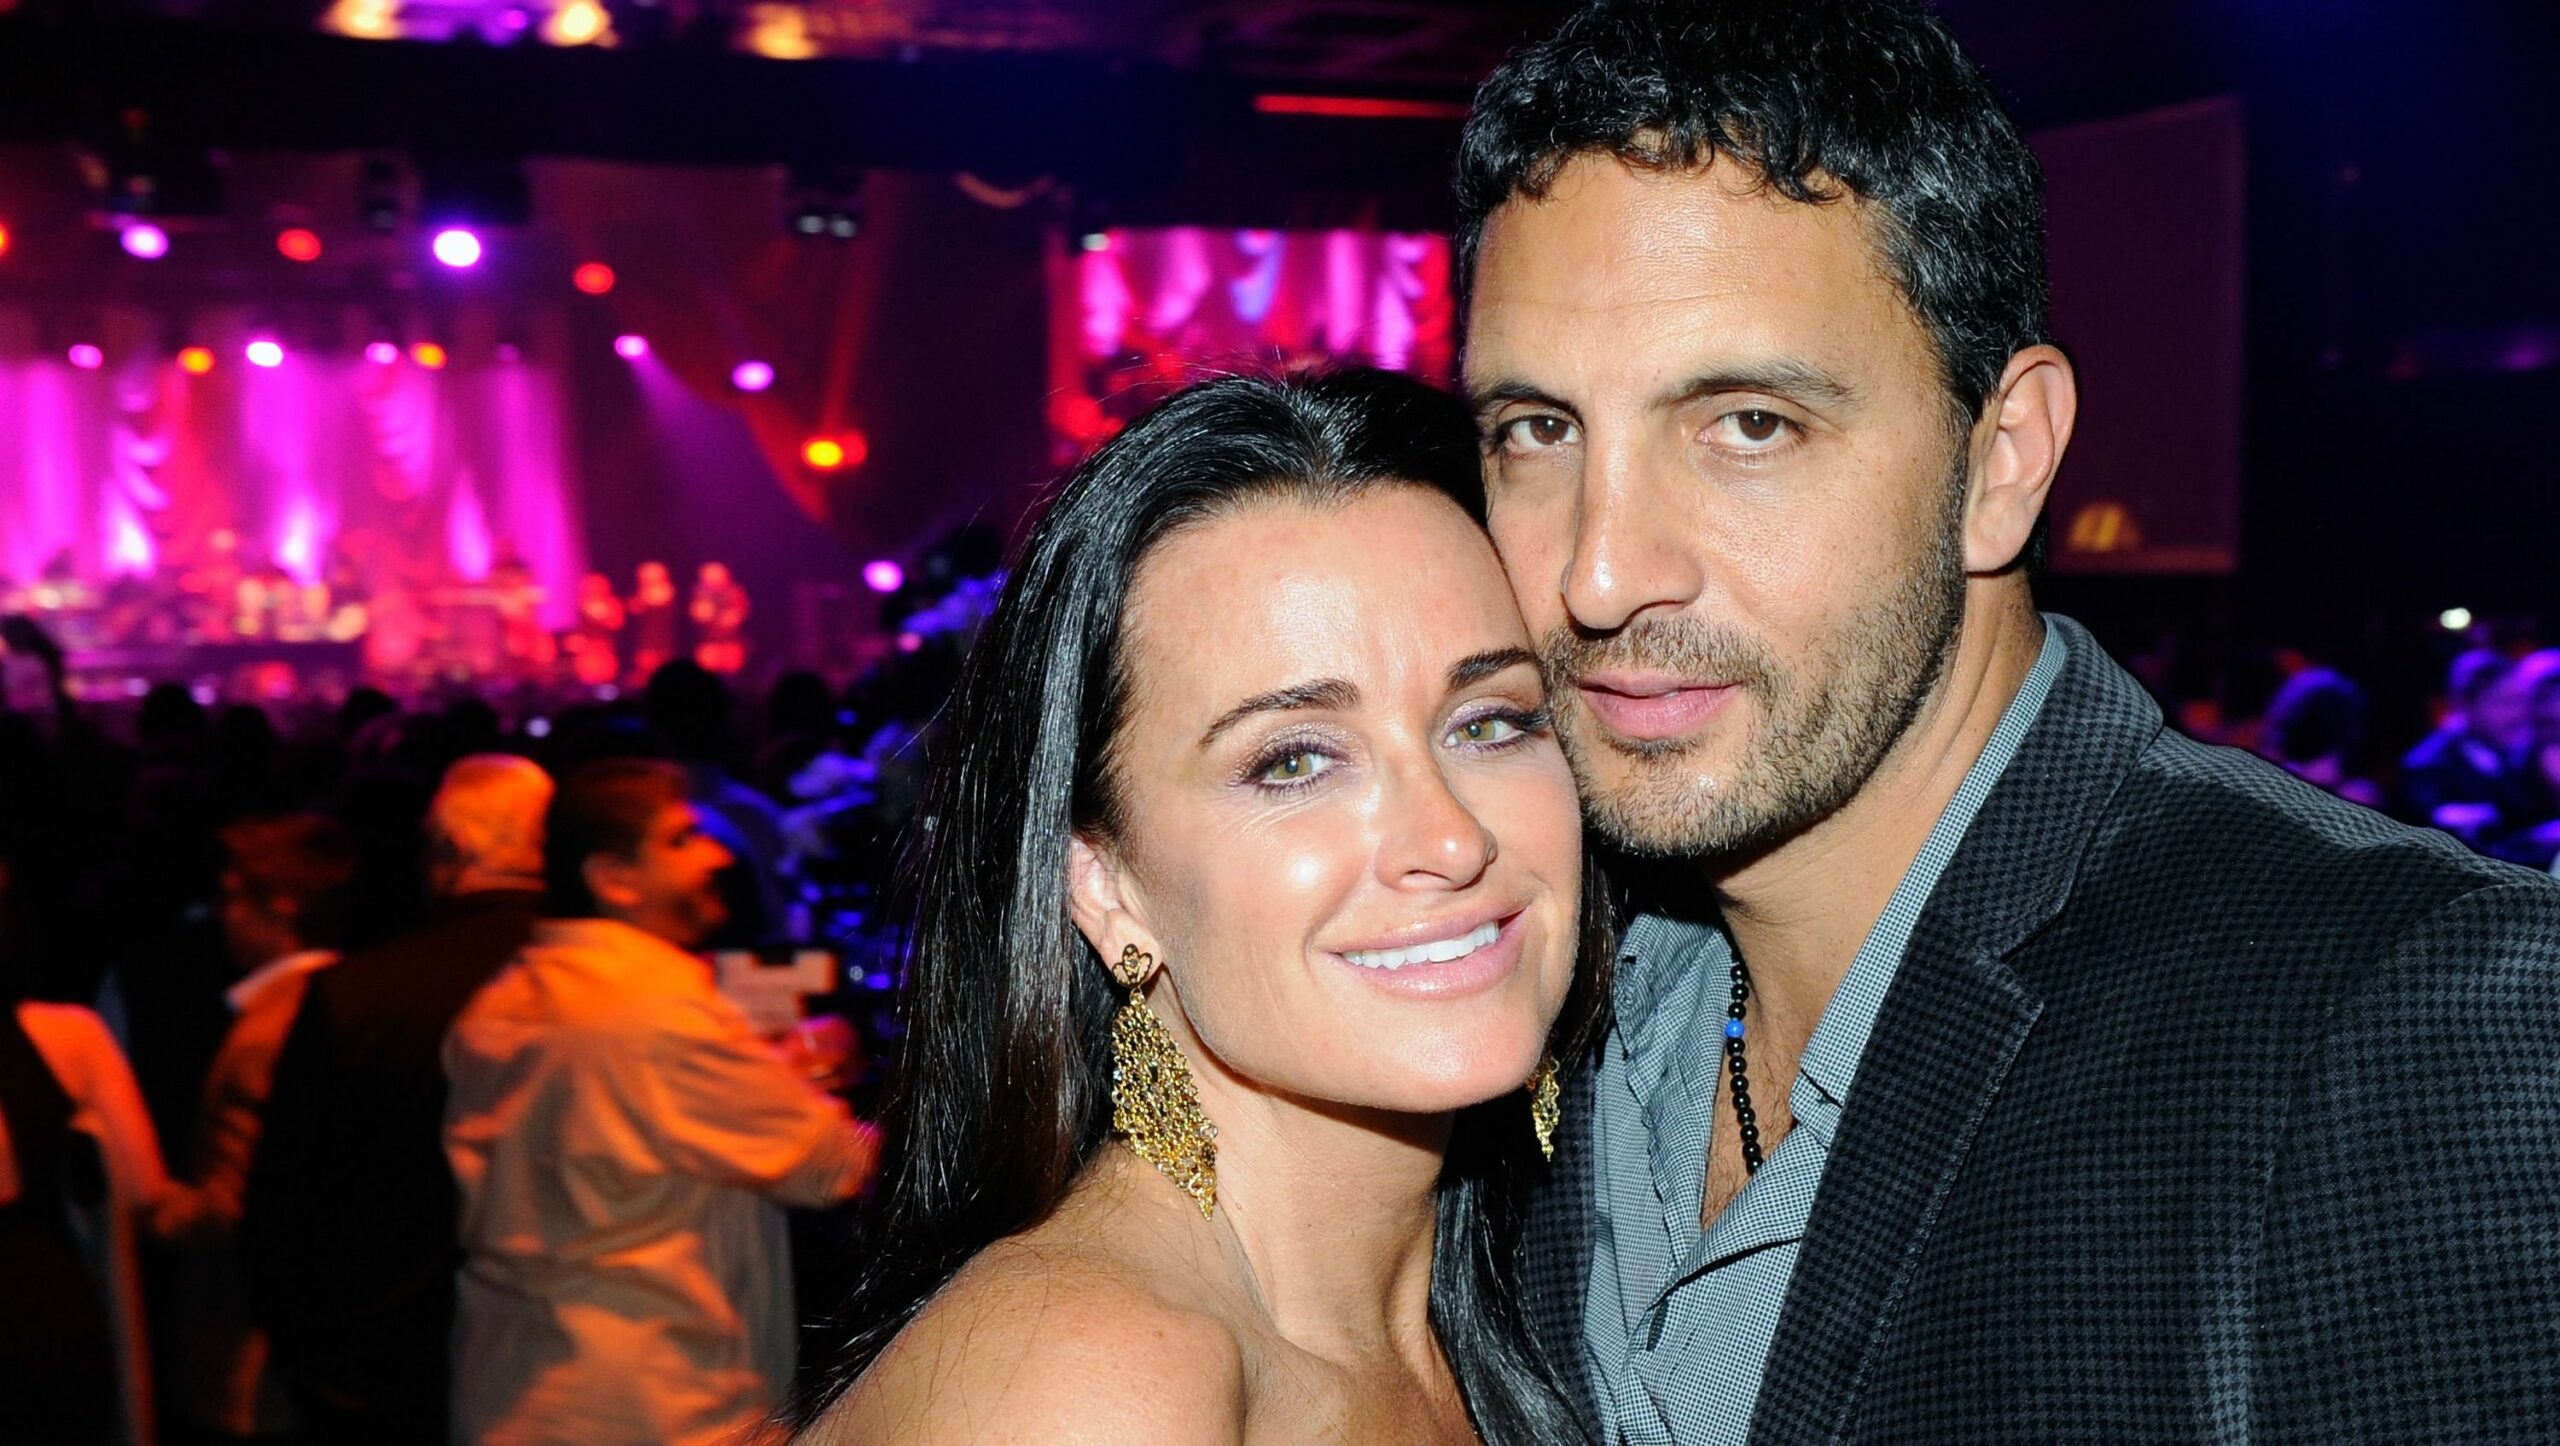 Is Kyle Richards still married to Mauricio?